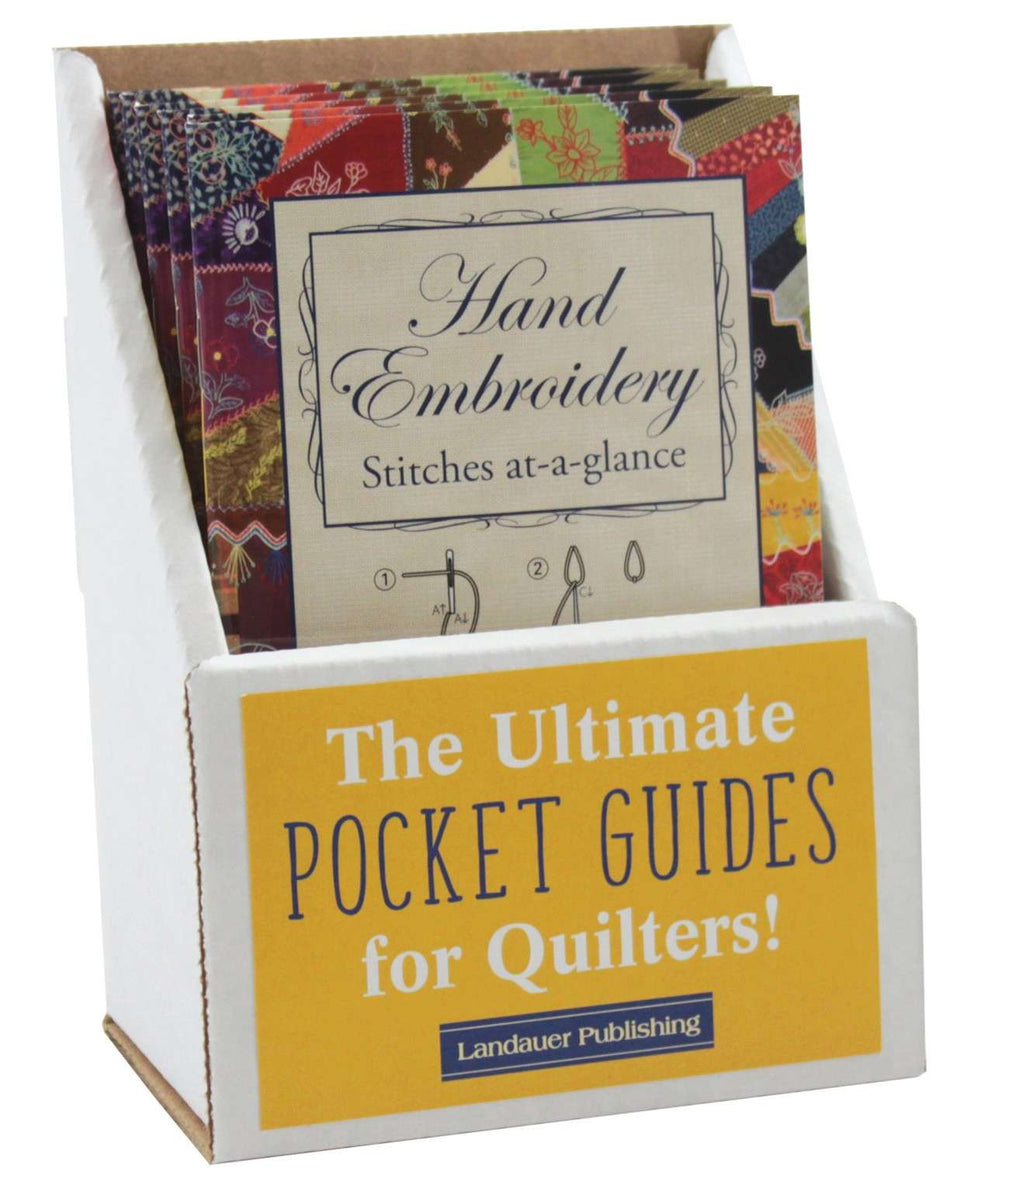 Hand Embroidery Stitches-at-a-glance book